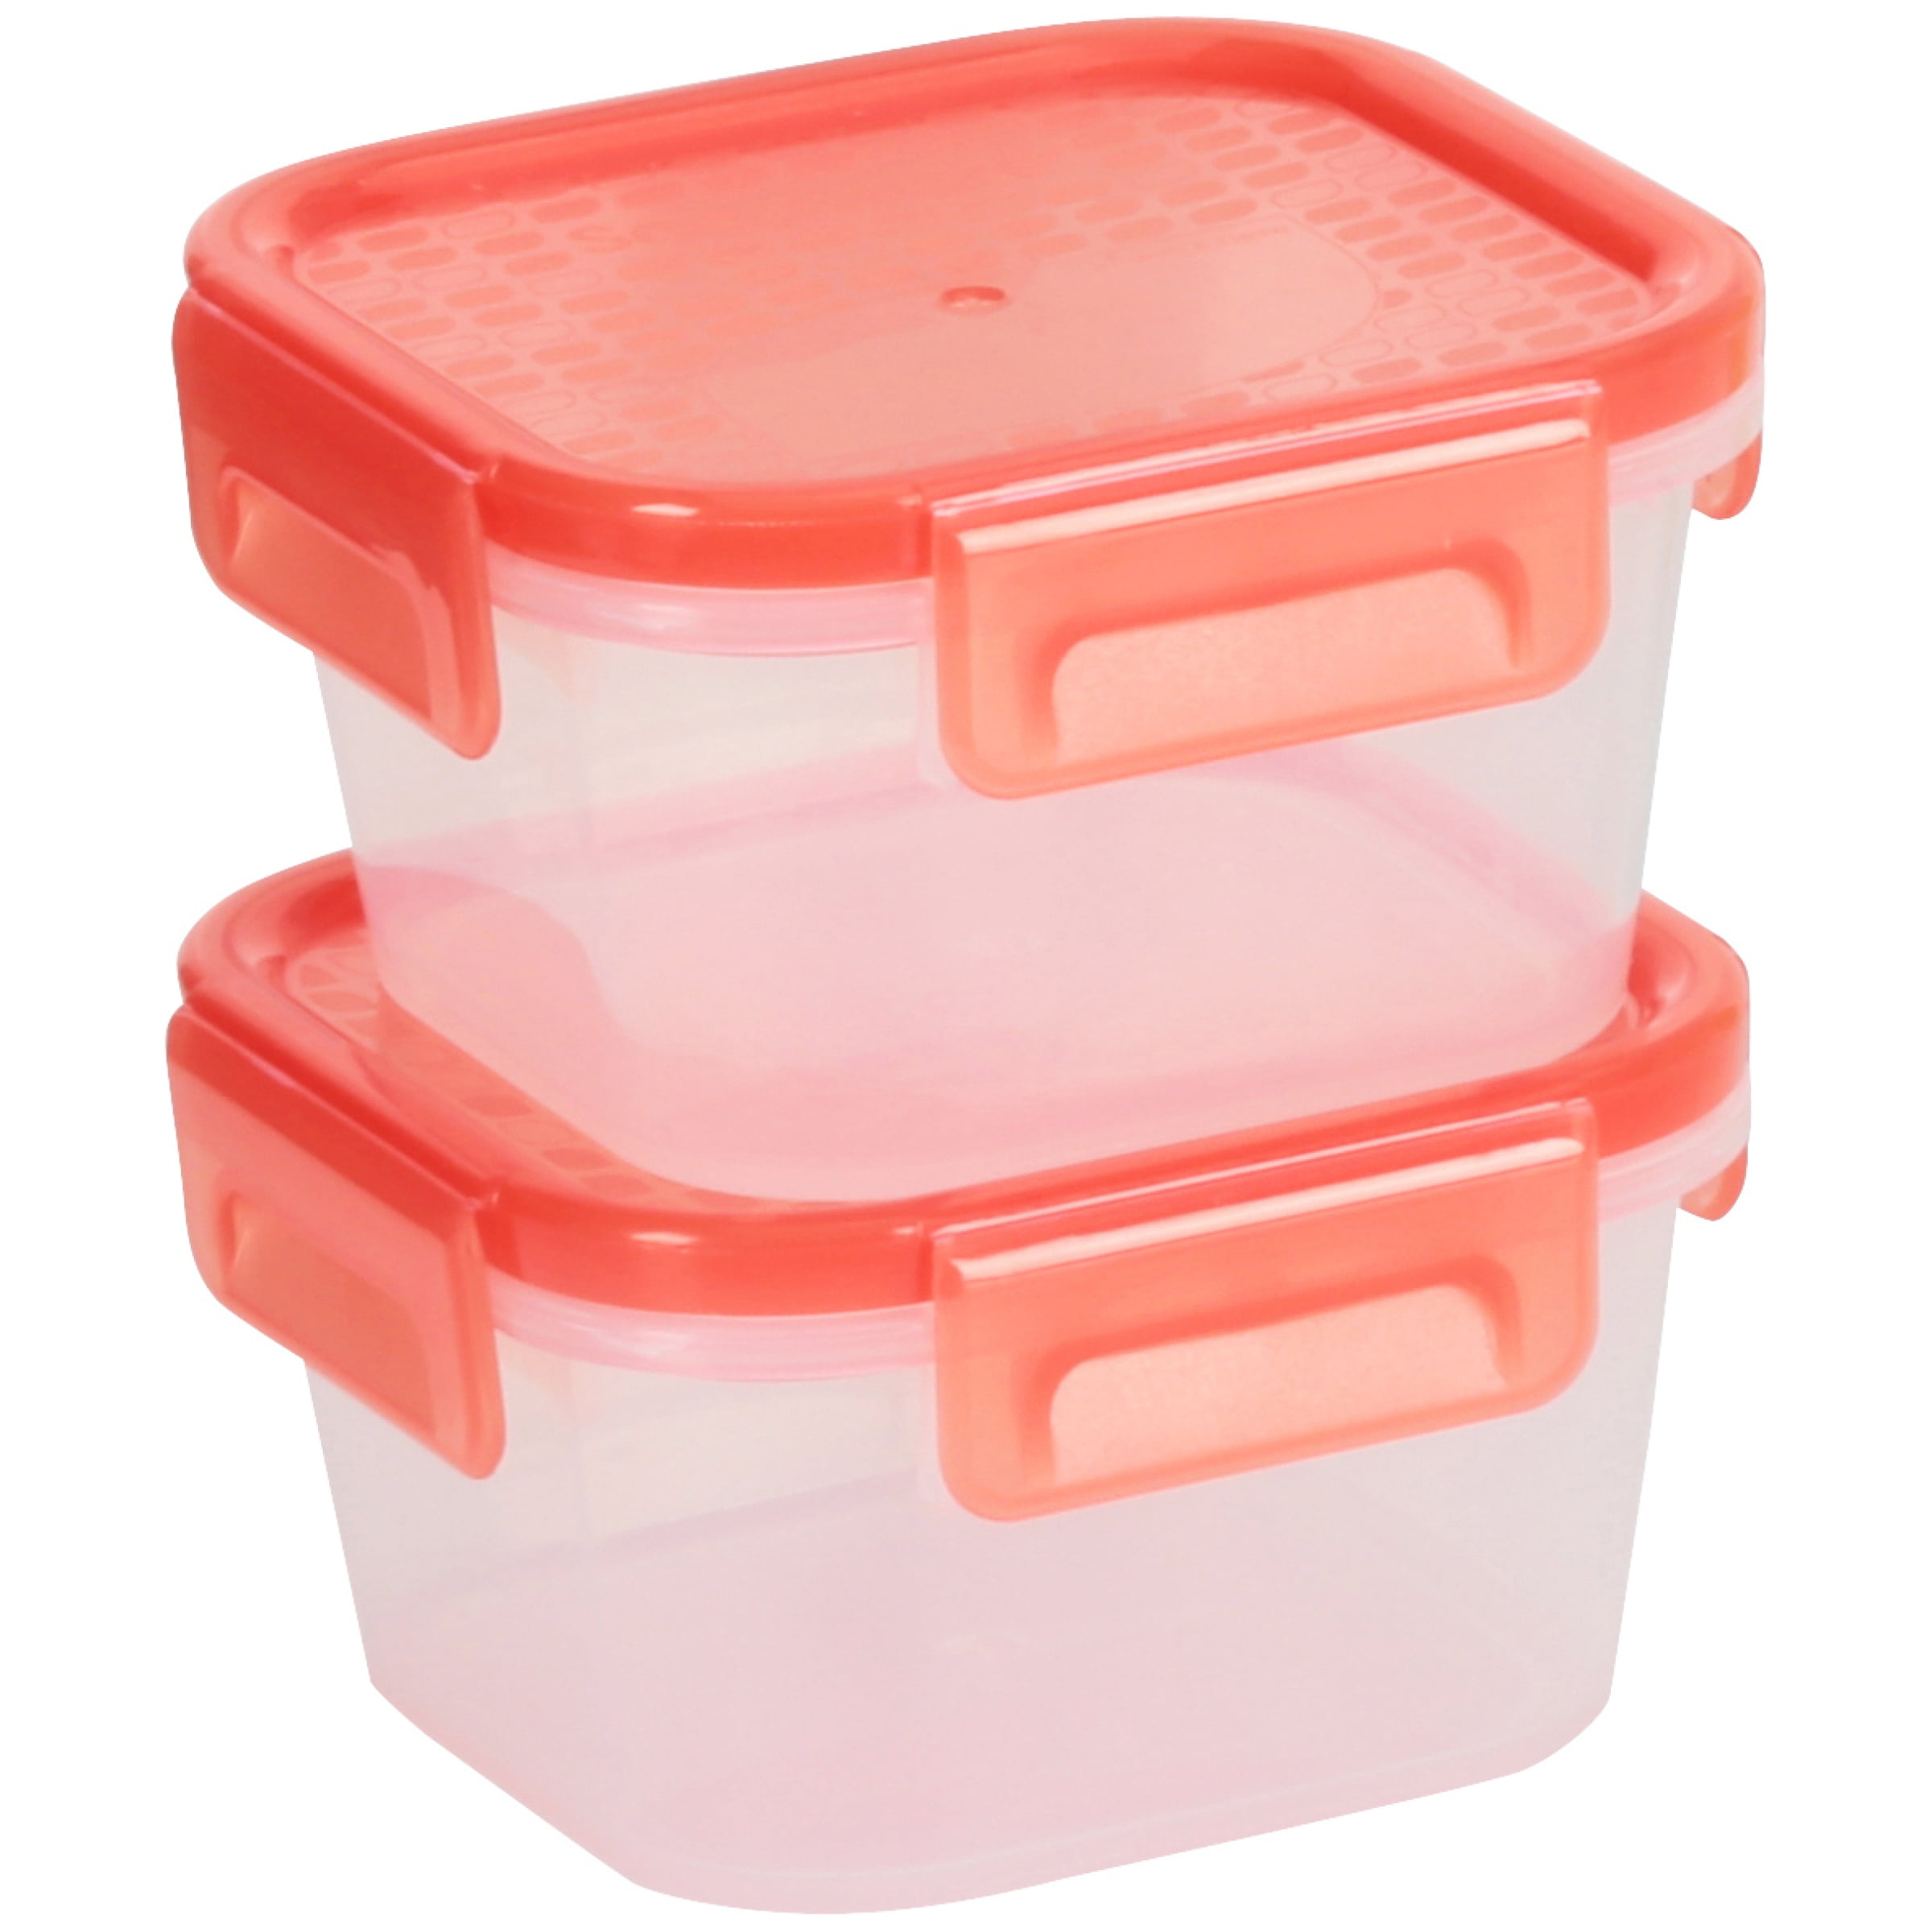 Aoibox 24-Piece Glass Food Storage Containers with Upgraded Snap Locking  Airtight Lids Set, Red SNPH002IN377 - The Home Depot